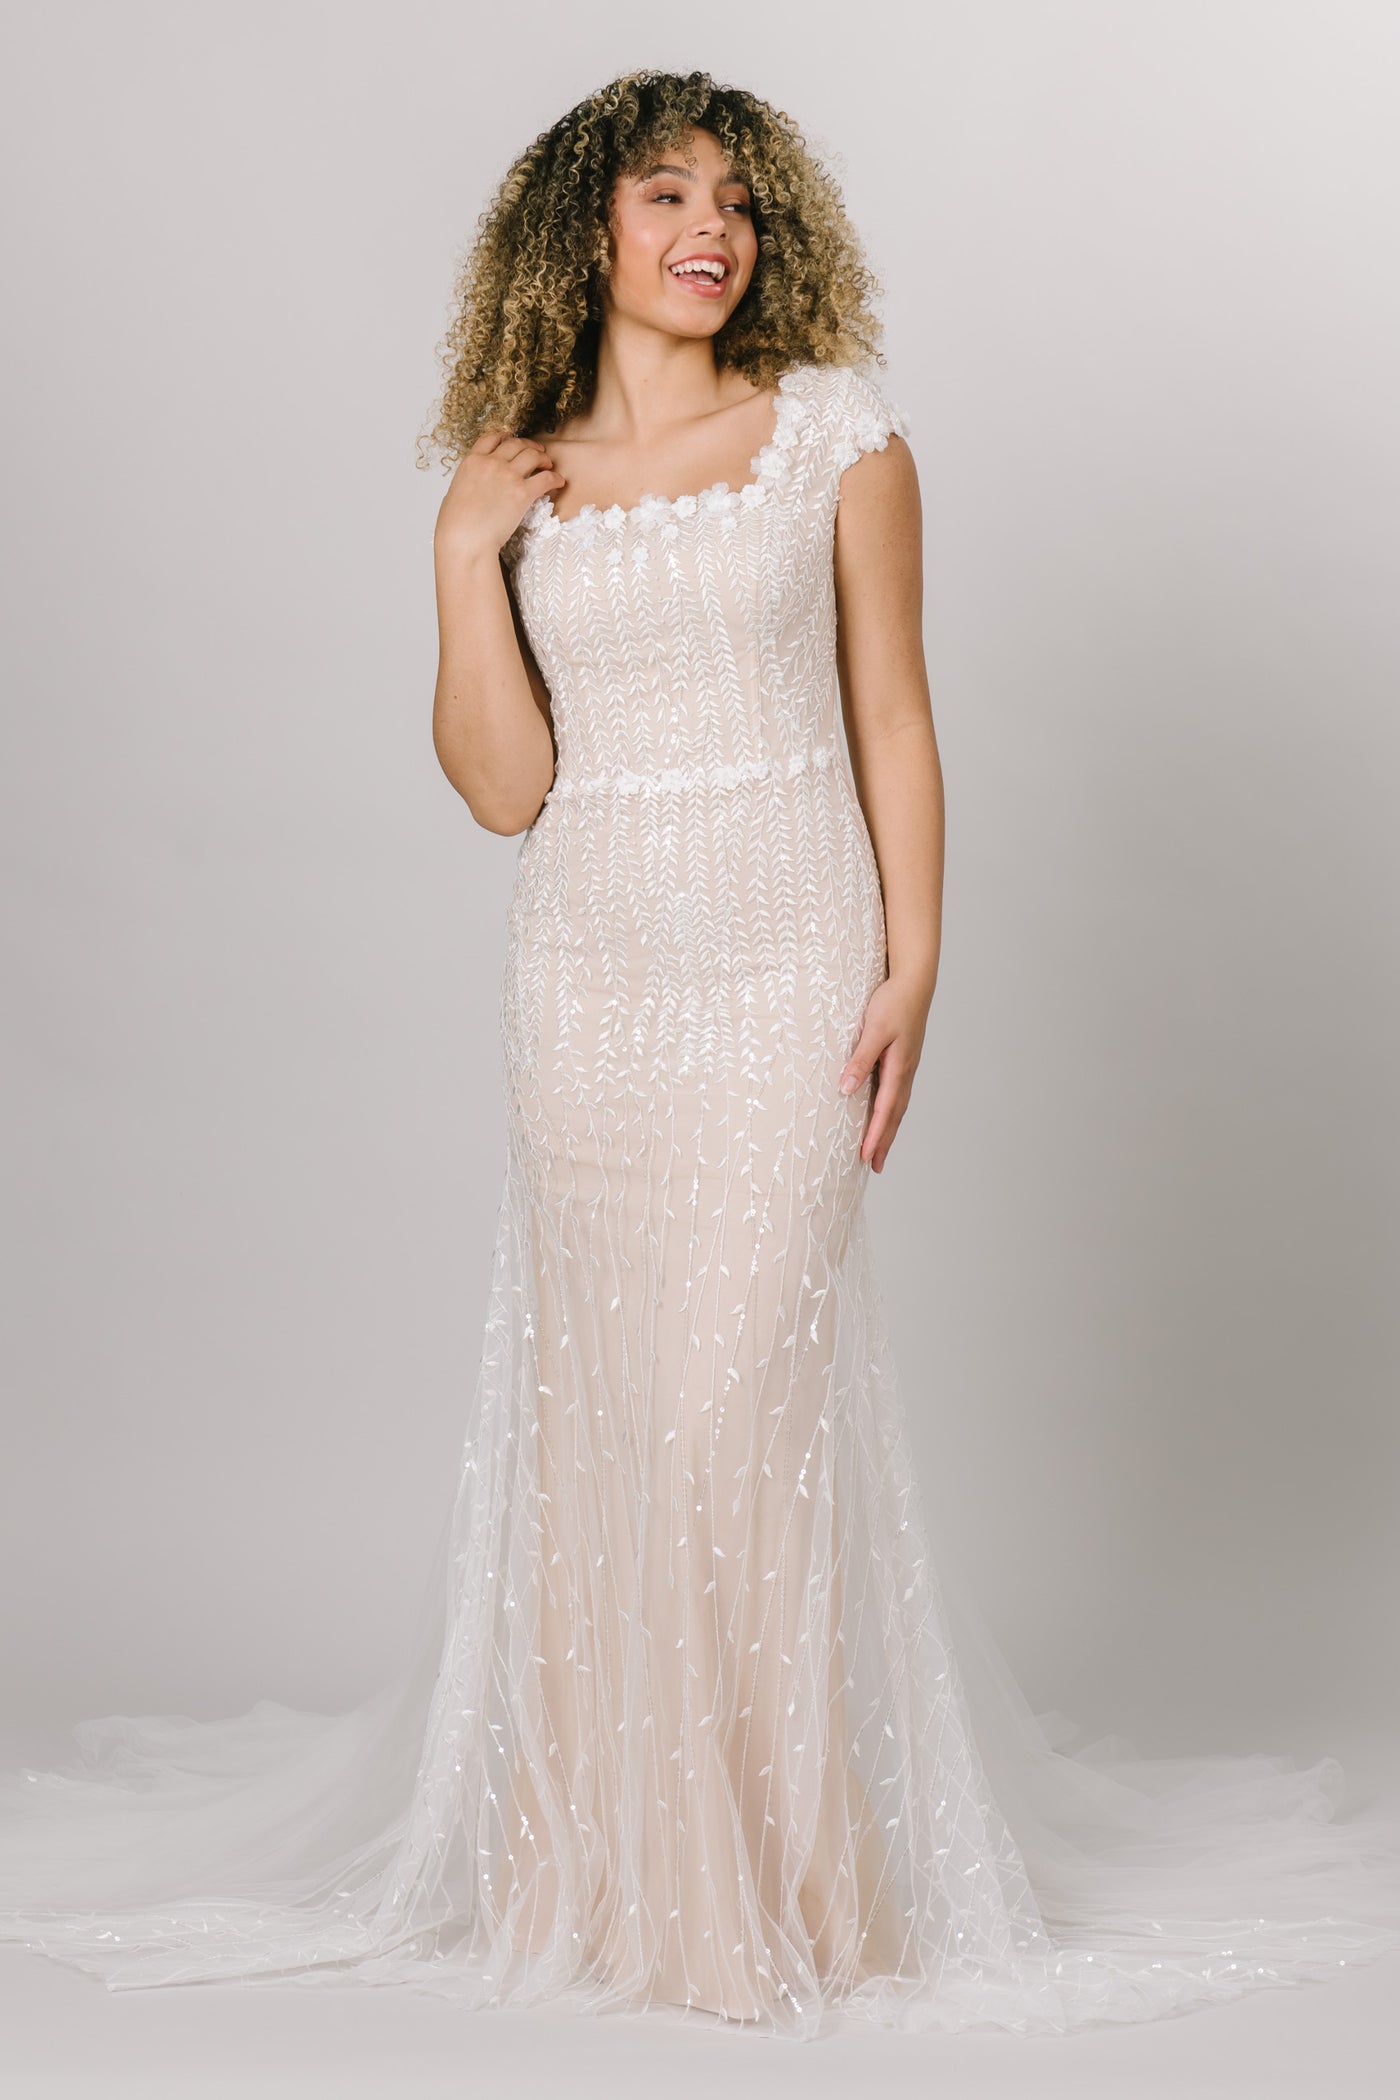 Front view of modest wedding dress, fitted silhouette with a square neckline. Champagne color underlining color with a delicate lace overtop.  